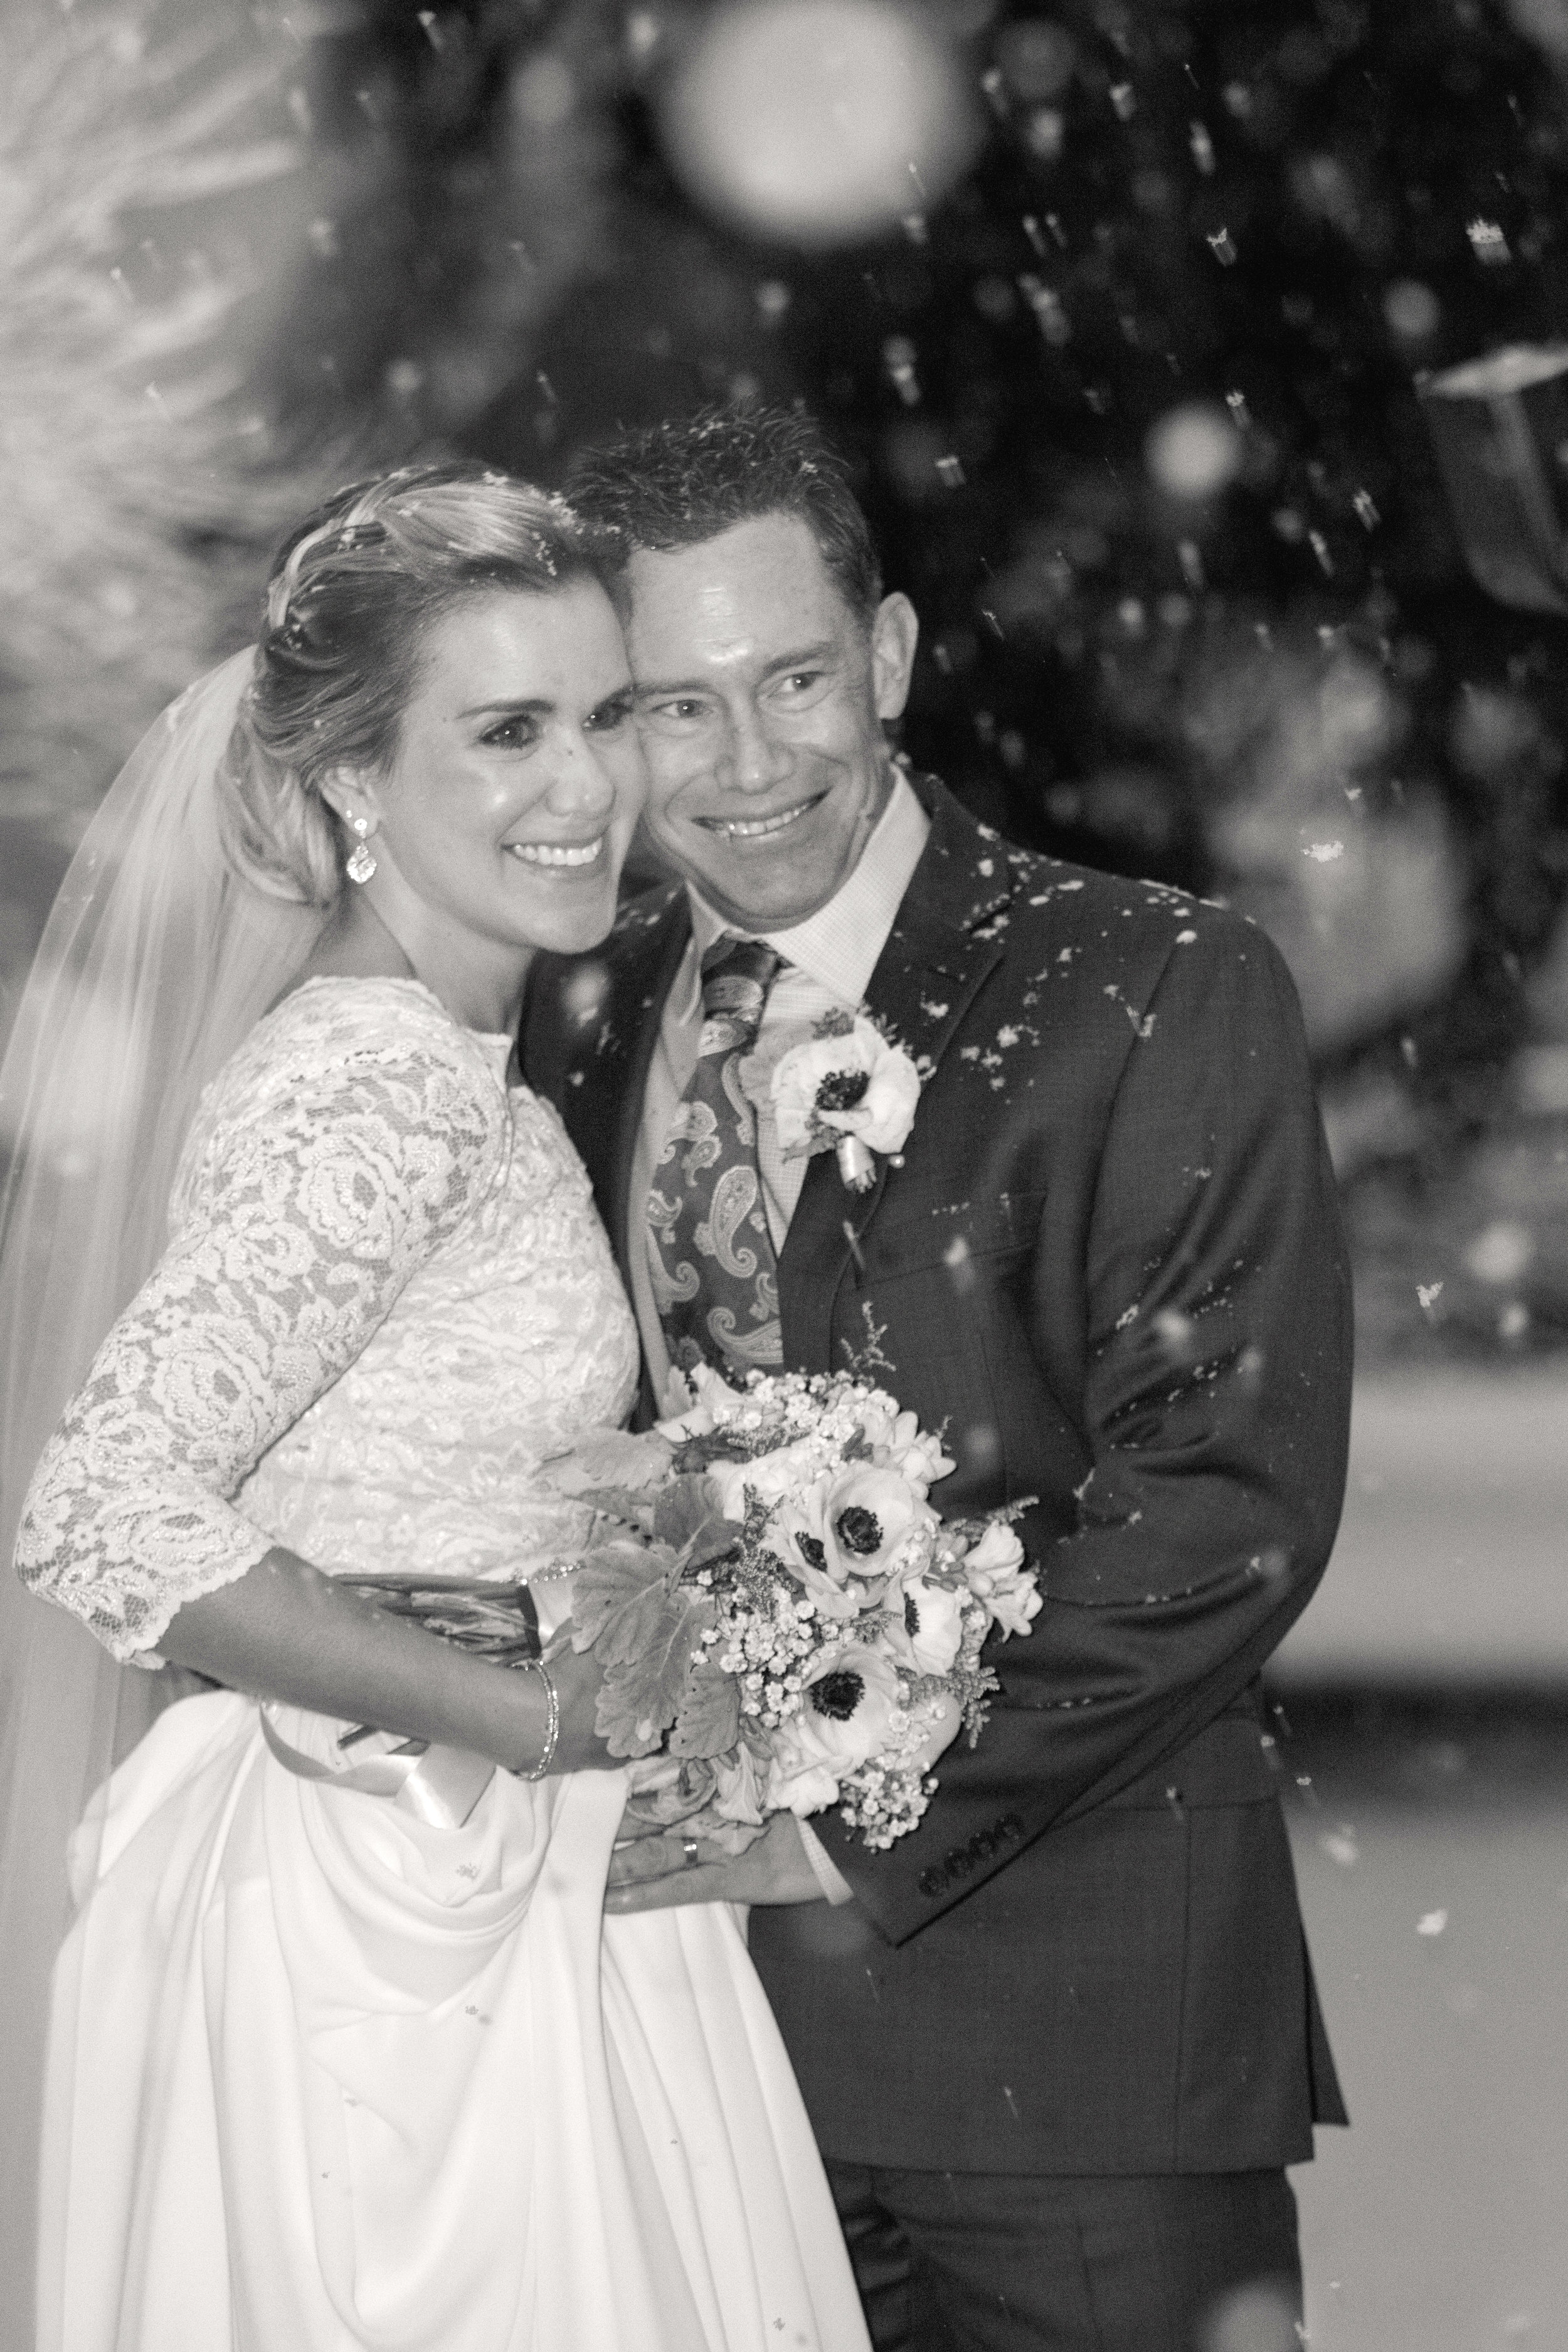 Bride and groom black and white smiling | mary and brad's Outdoor wedding photography at Hudson Gardens | Farm Wedding Photographer | Apollo Fields Wedding Photojournalism